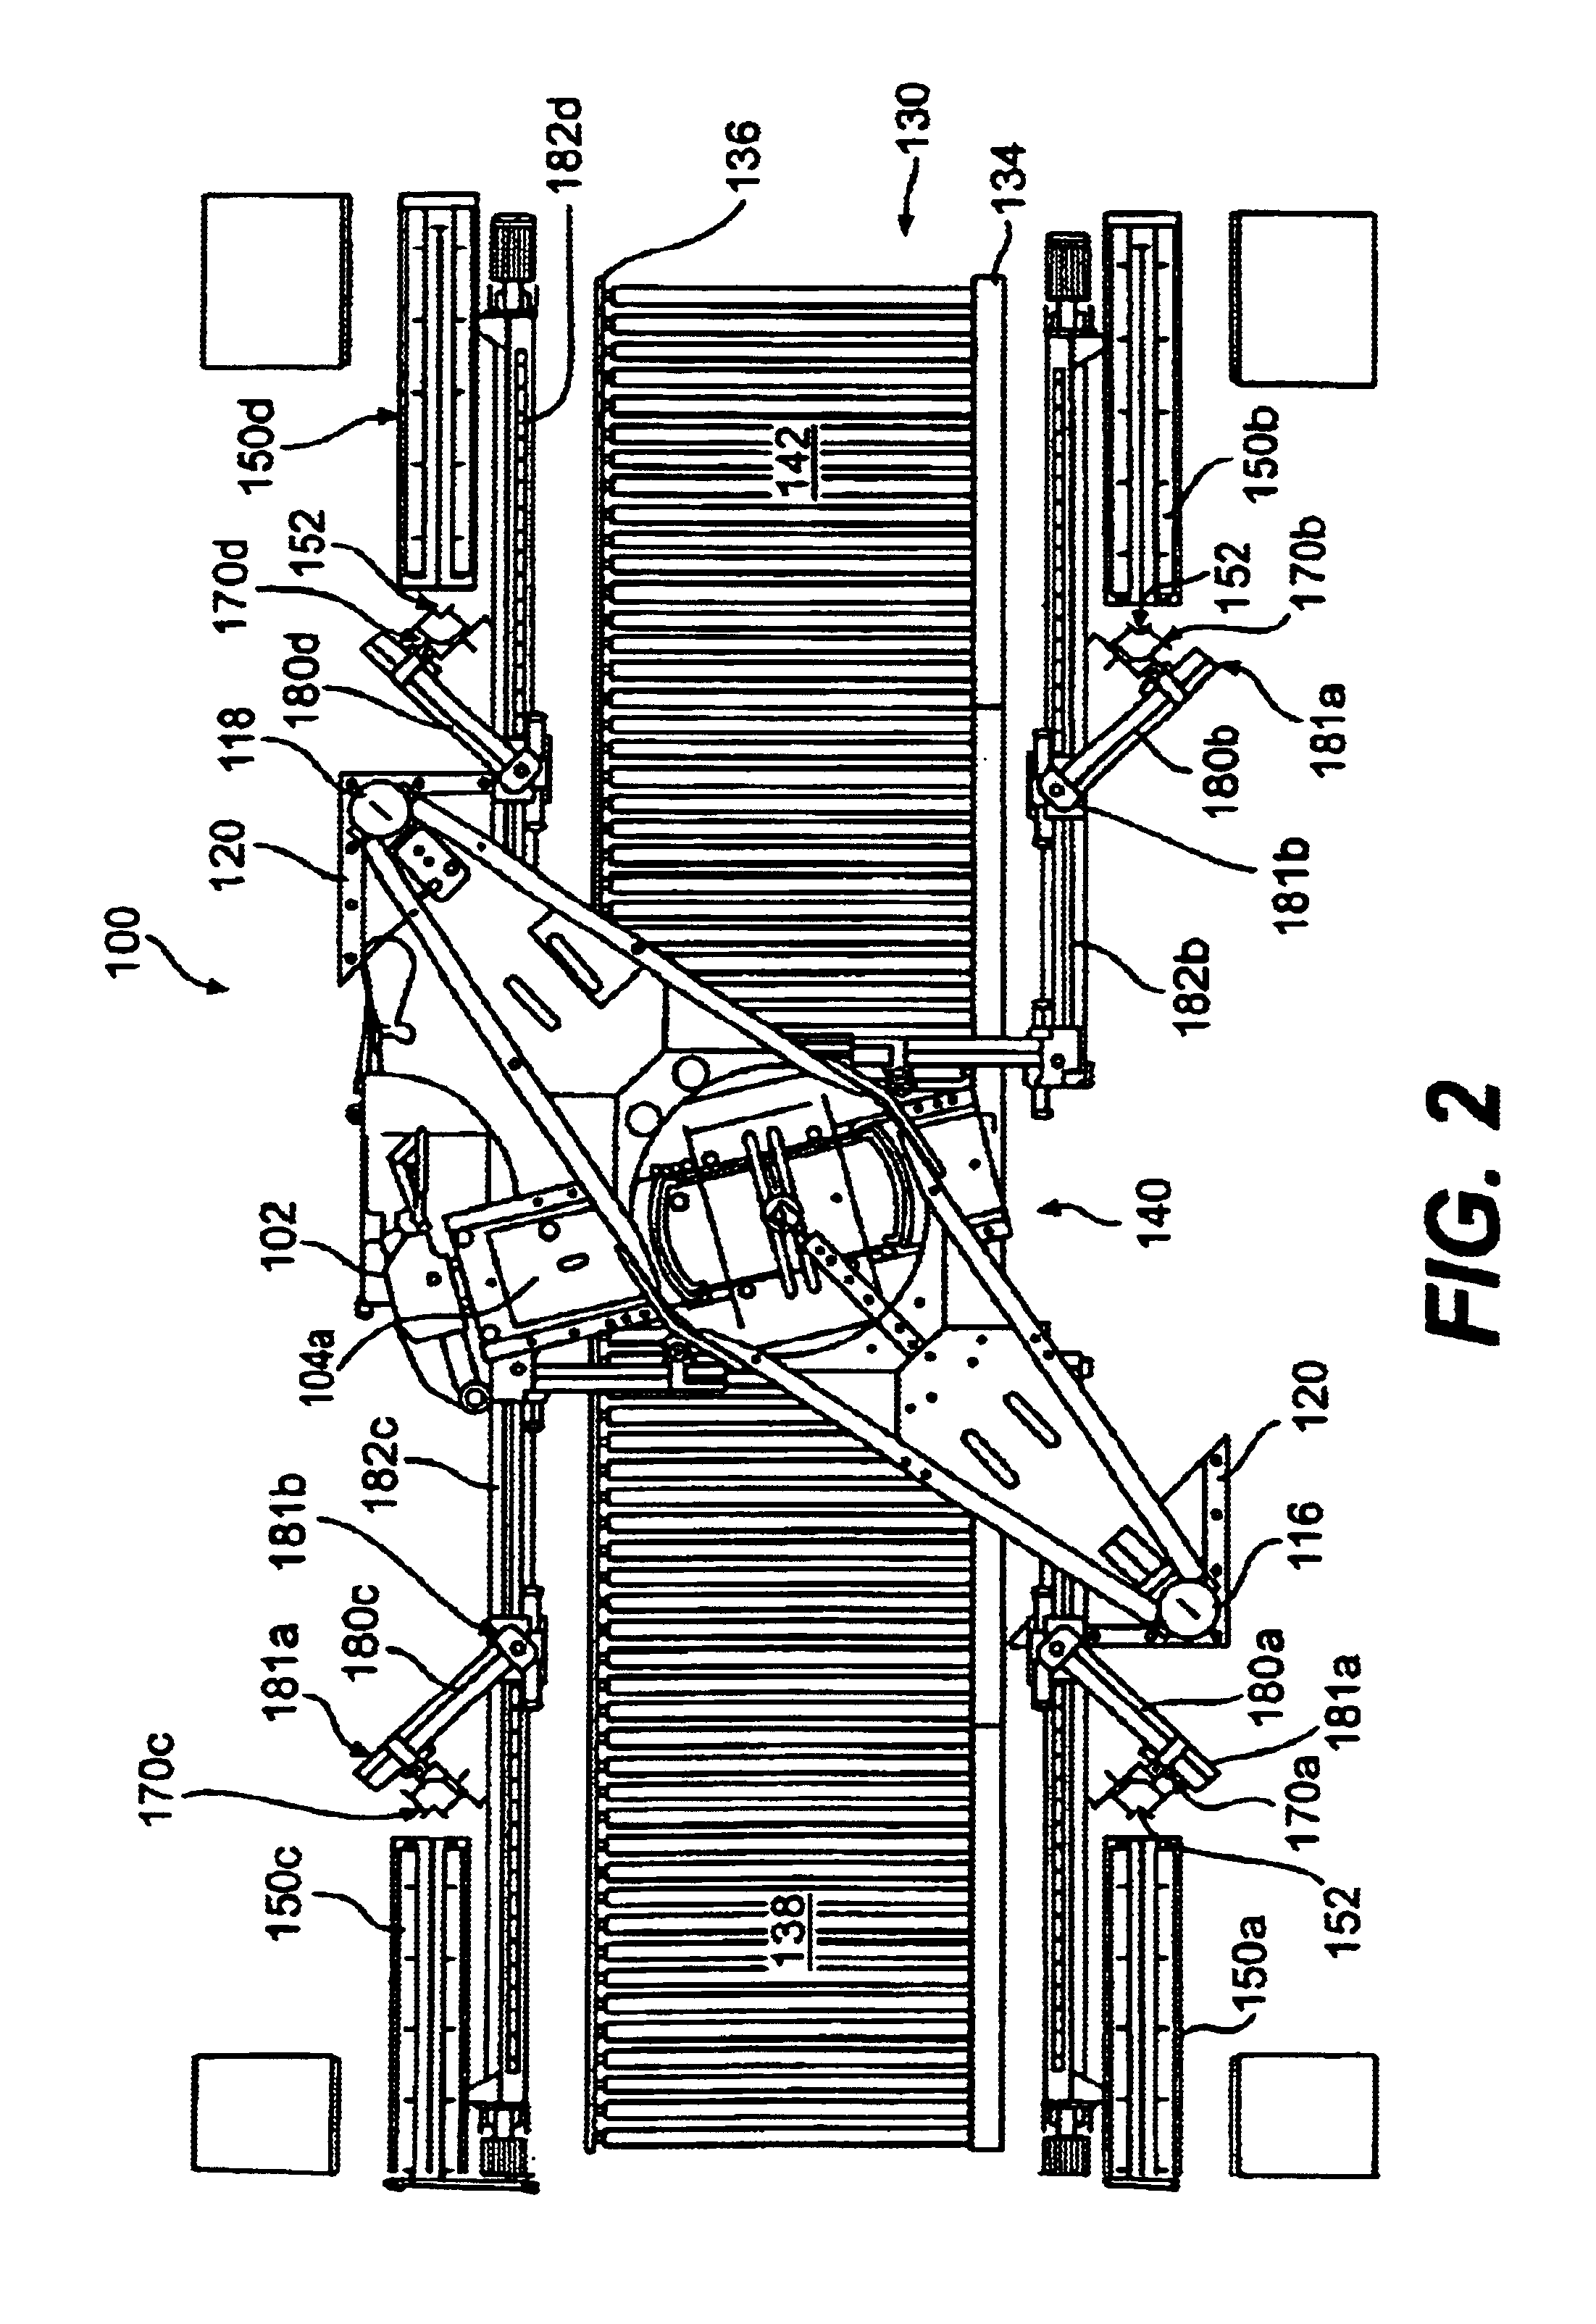 Apparatus and method for applying cornerboards to a load